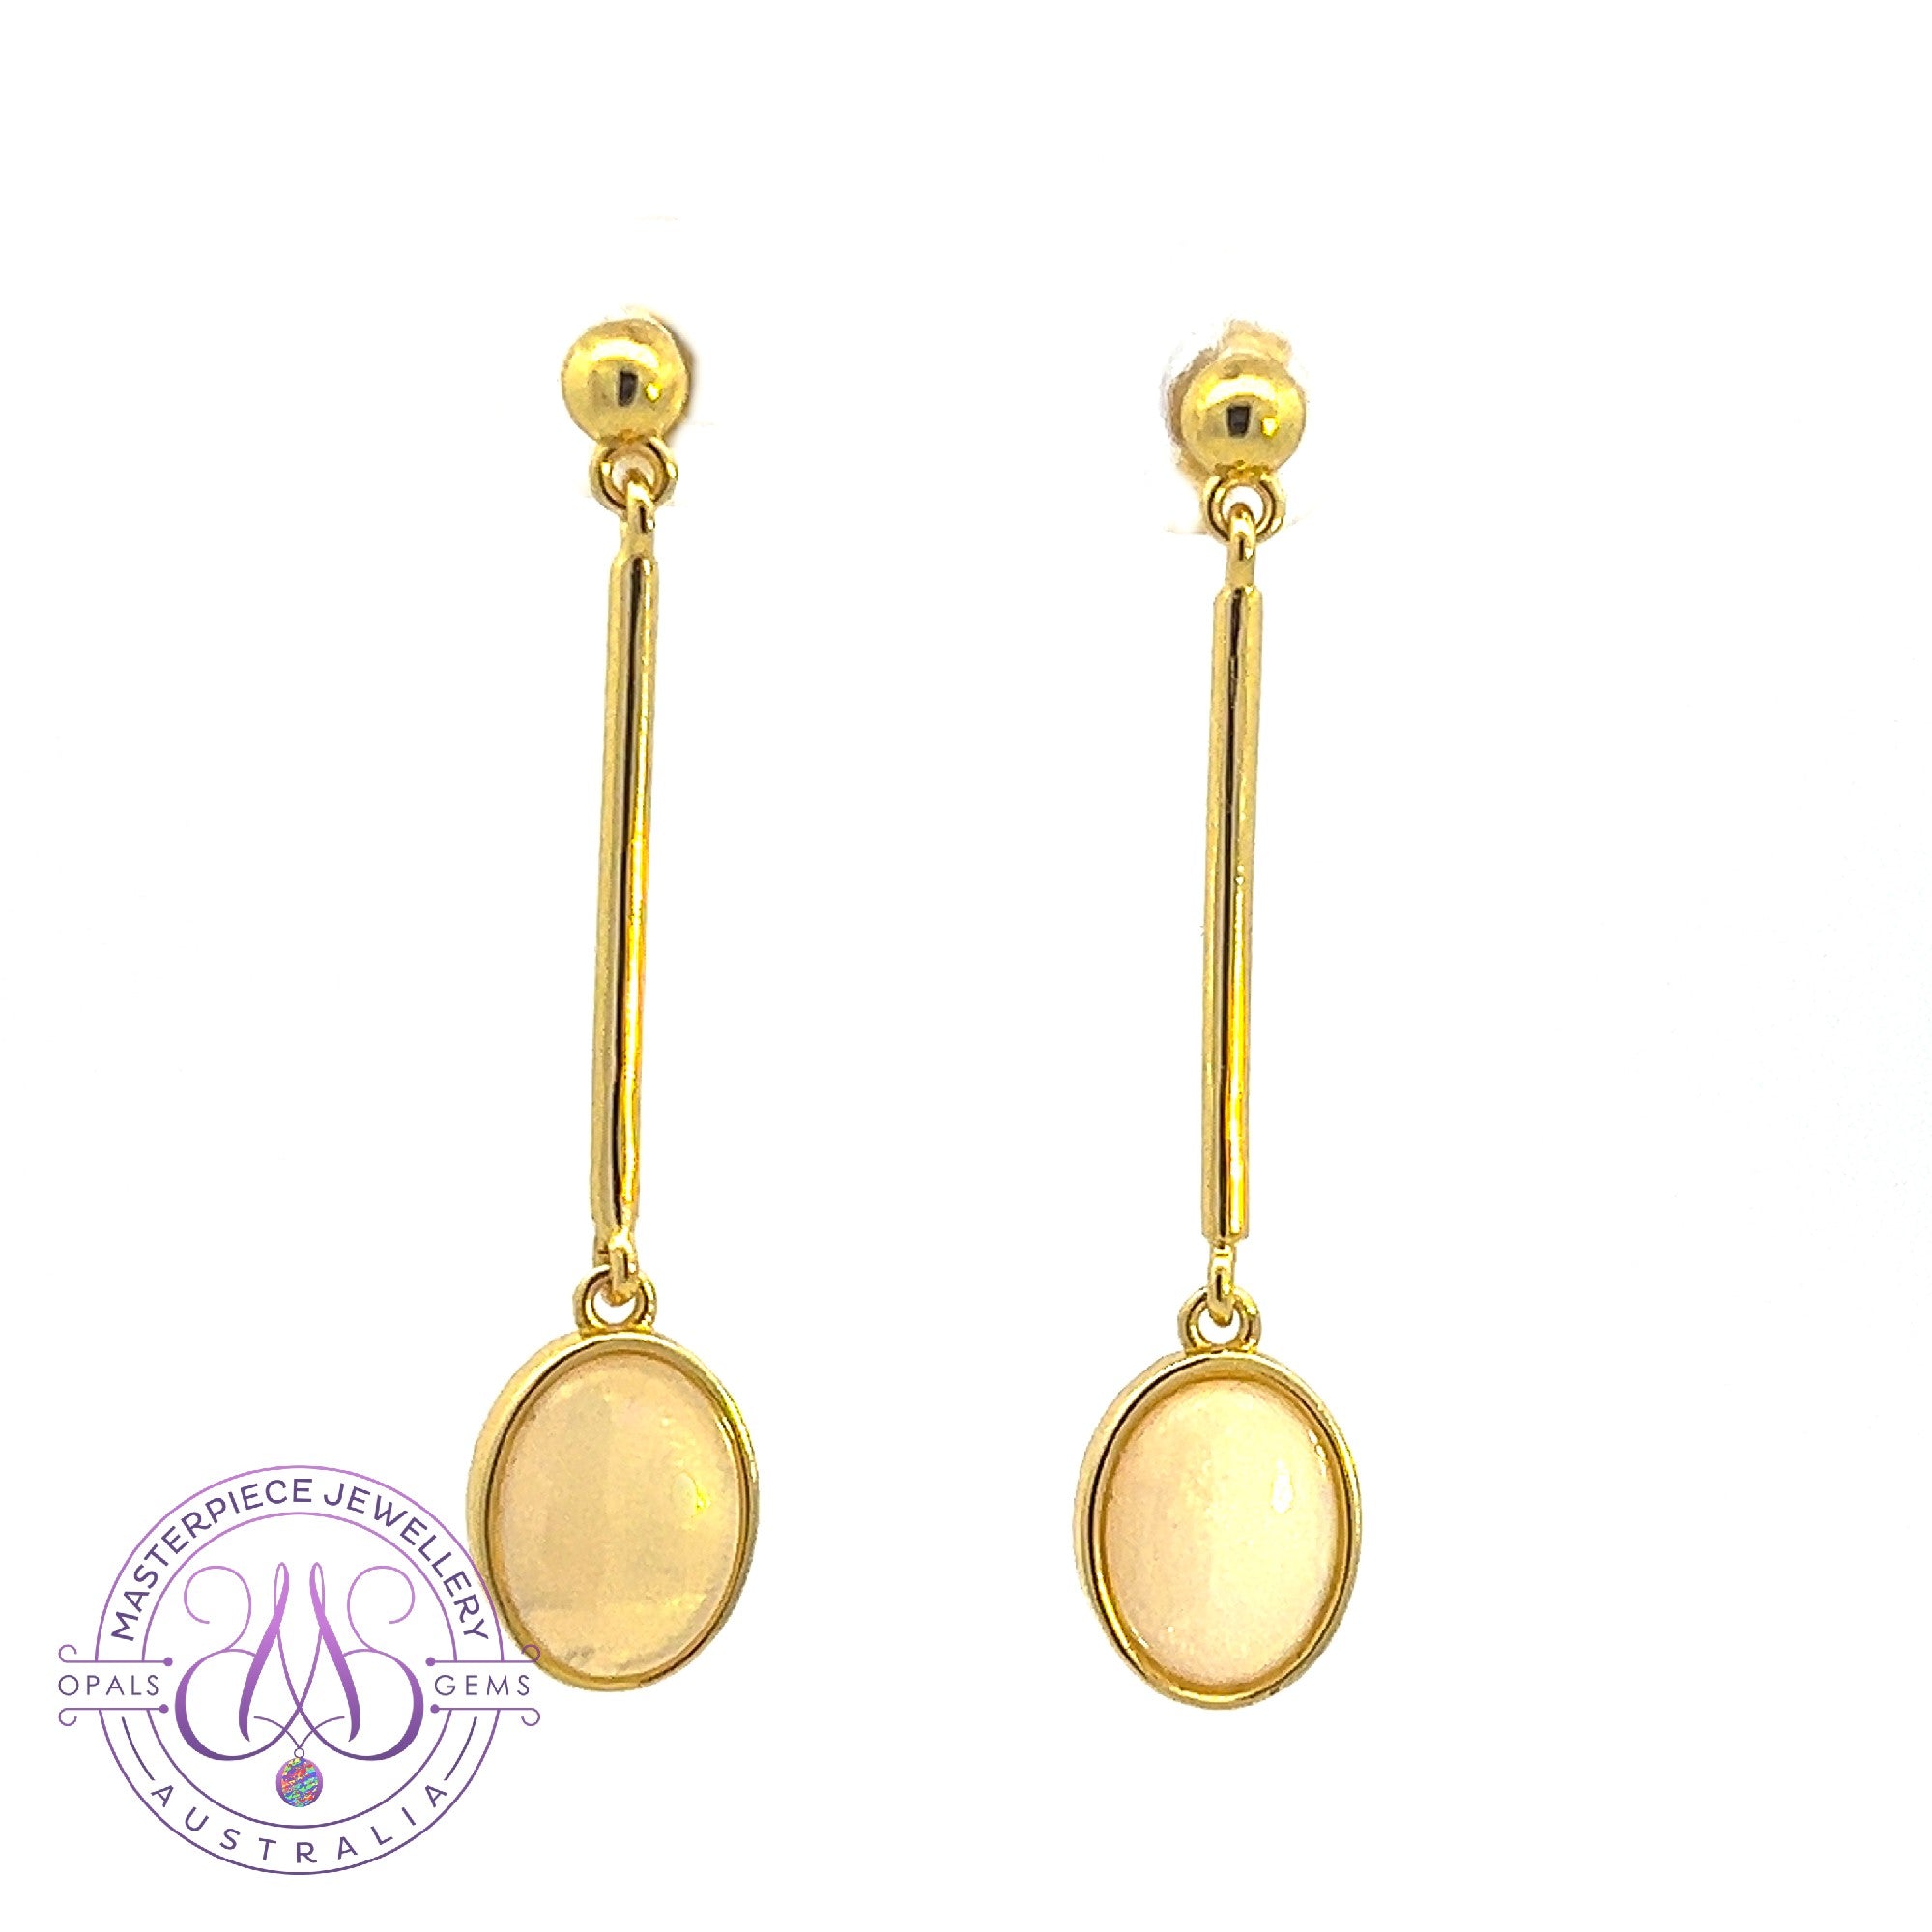 Pair of Gold Plated long bar dangling earrings with White Opals 9x7mm